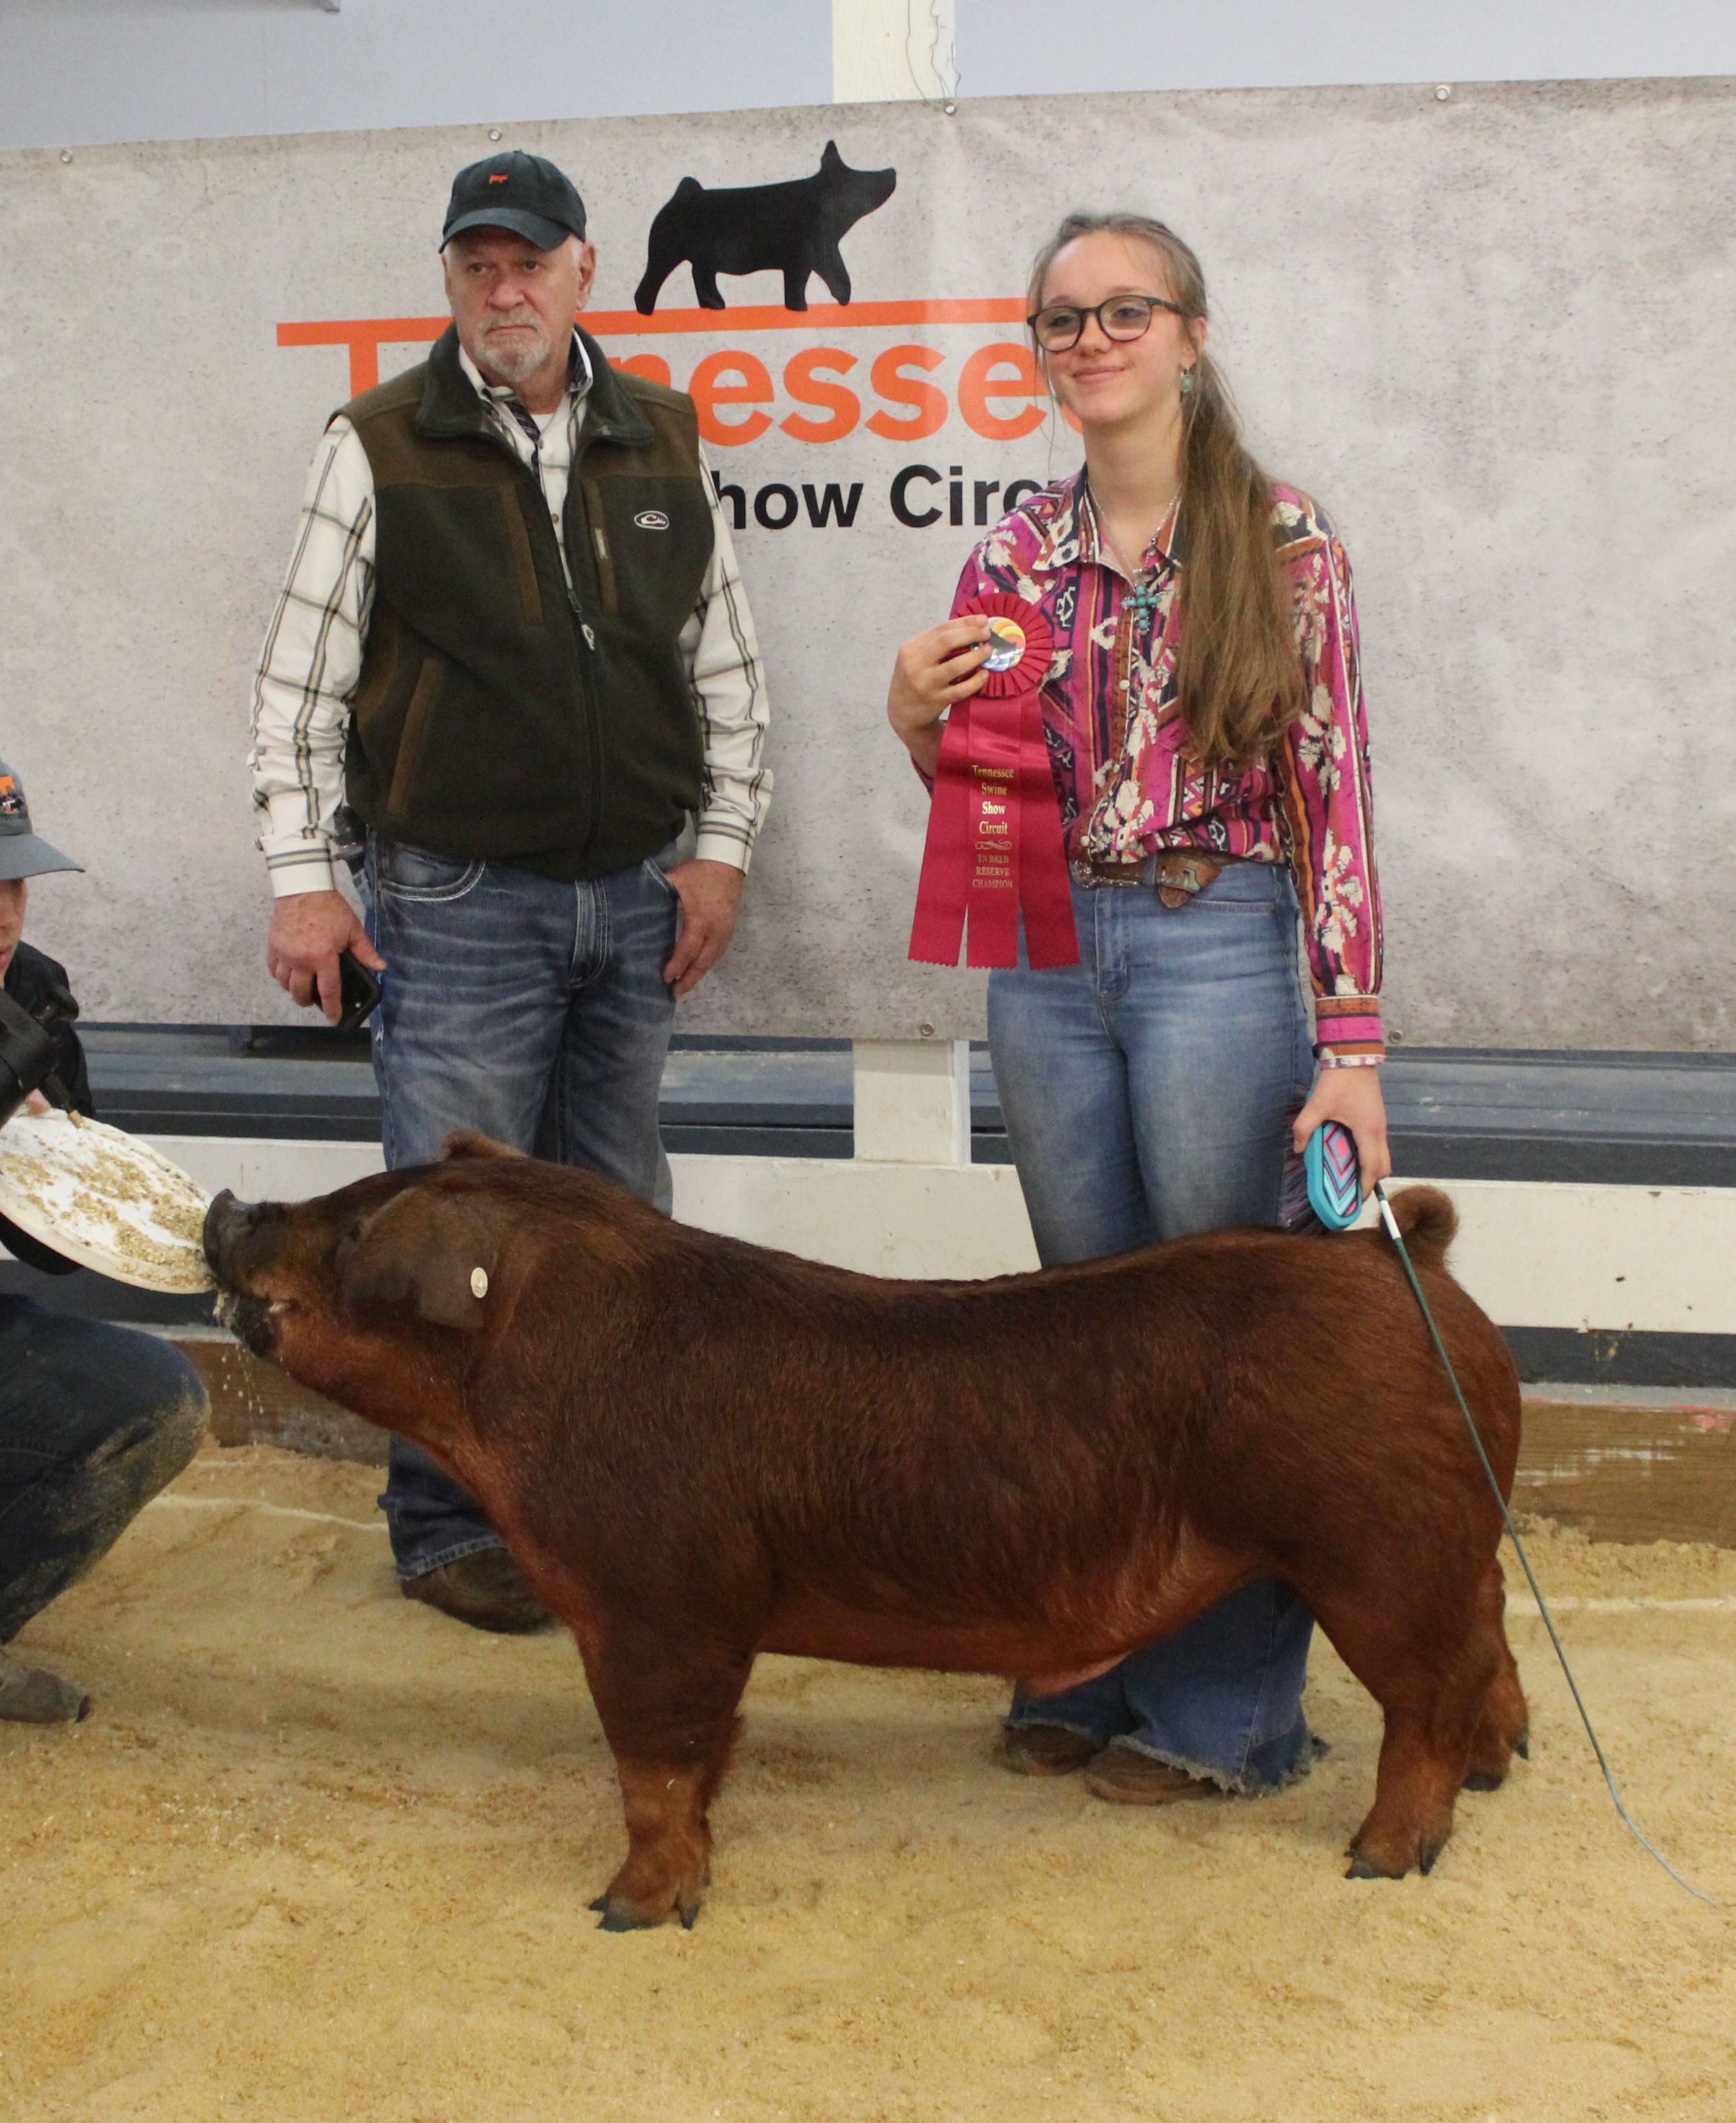 Ivy Johnson
2022 New Year's Countdown Spectacular
Day 2 - Reserve Champion Duroc Barrow